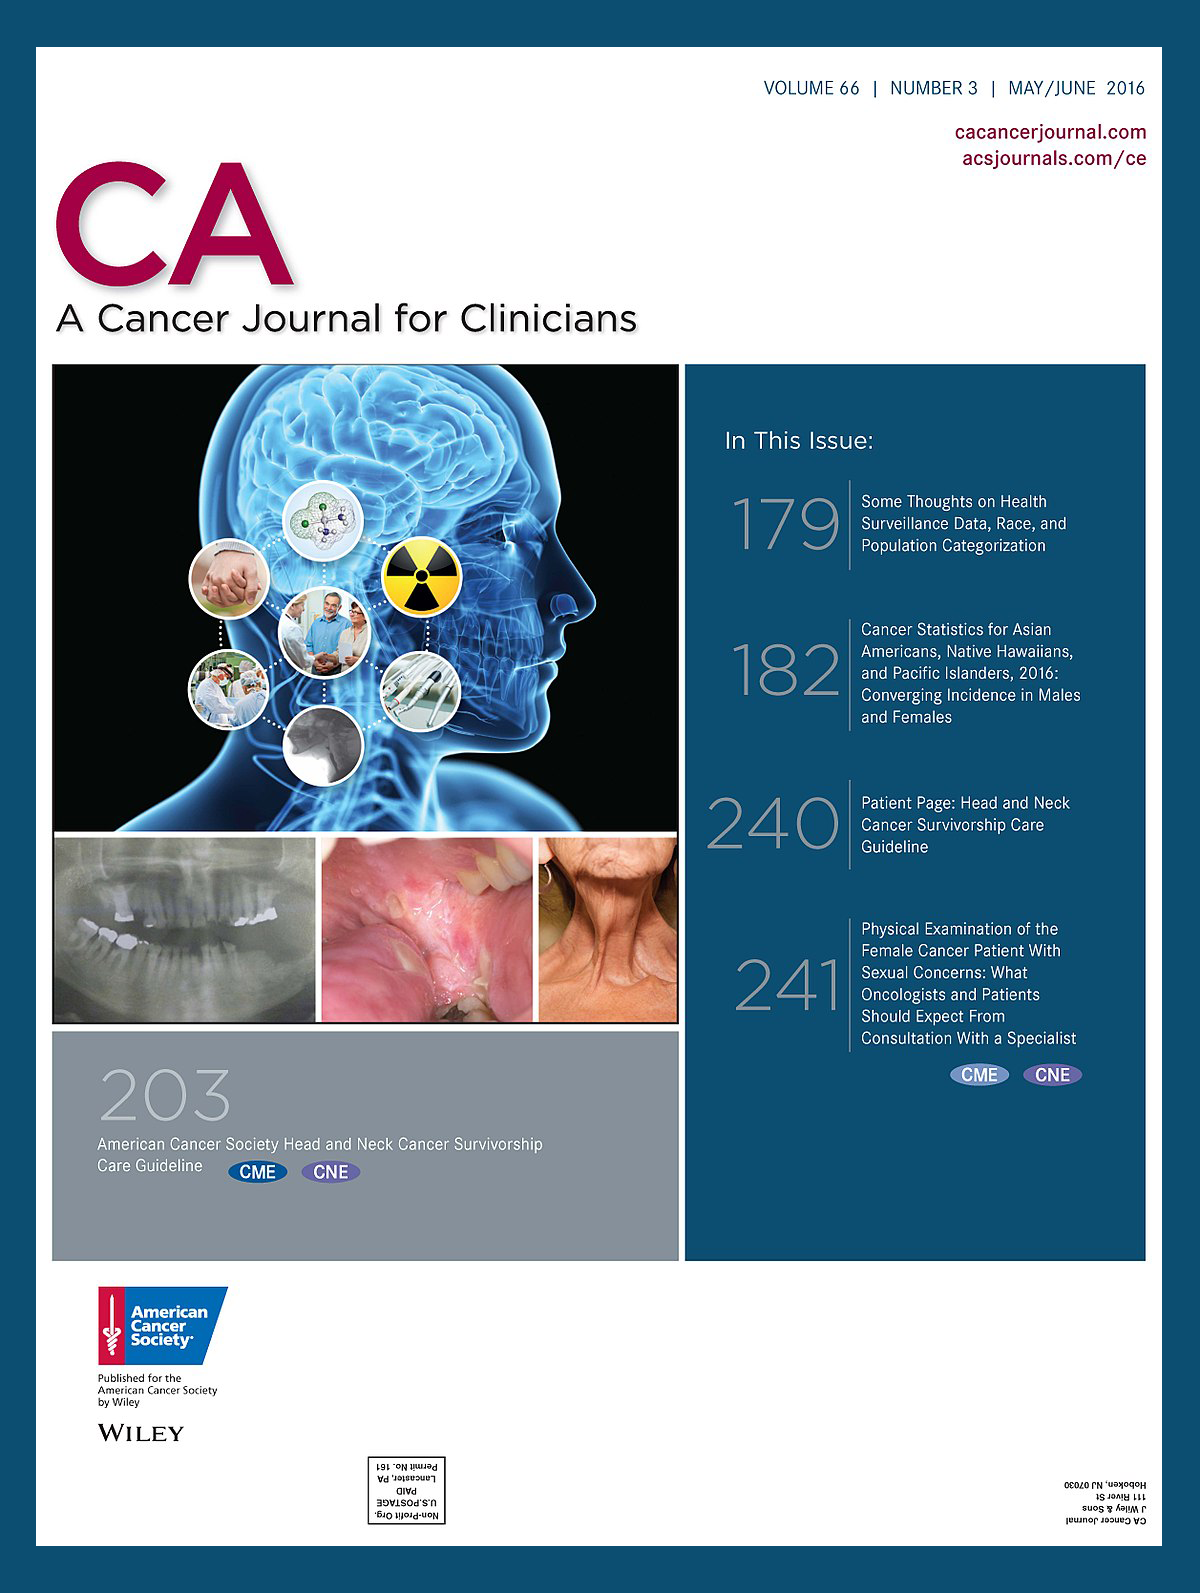 CA-A CANCER JOURNAL FOR CLINICIANS